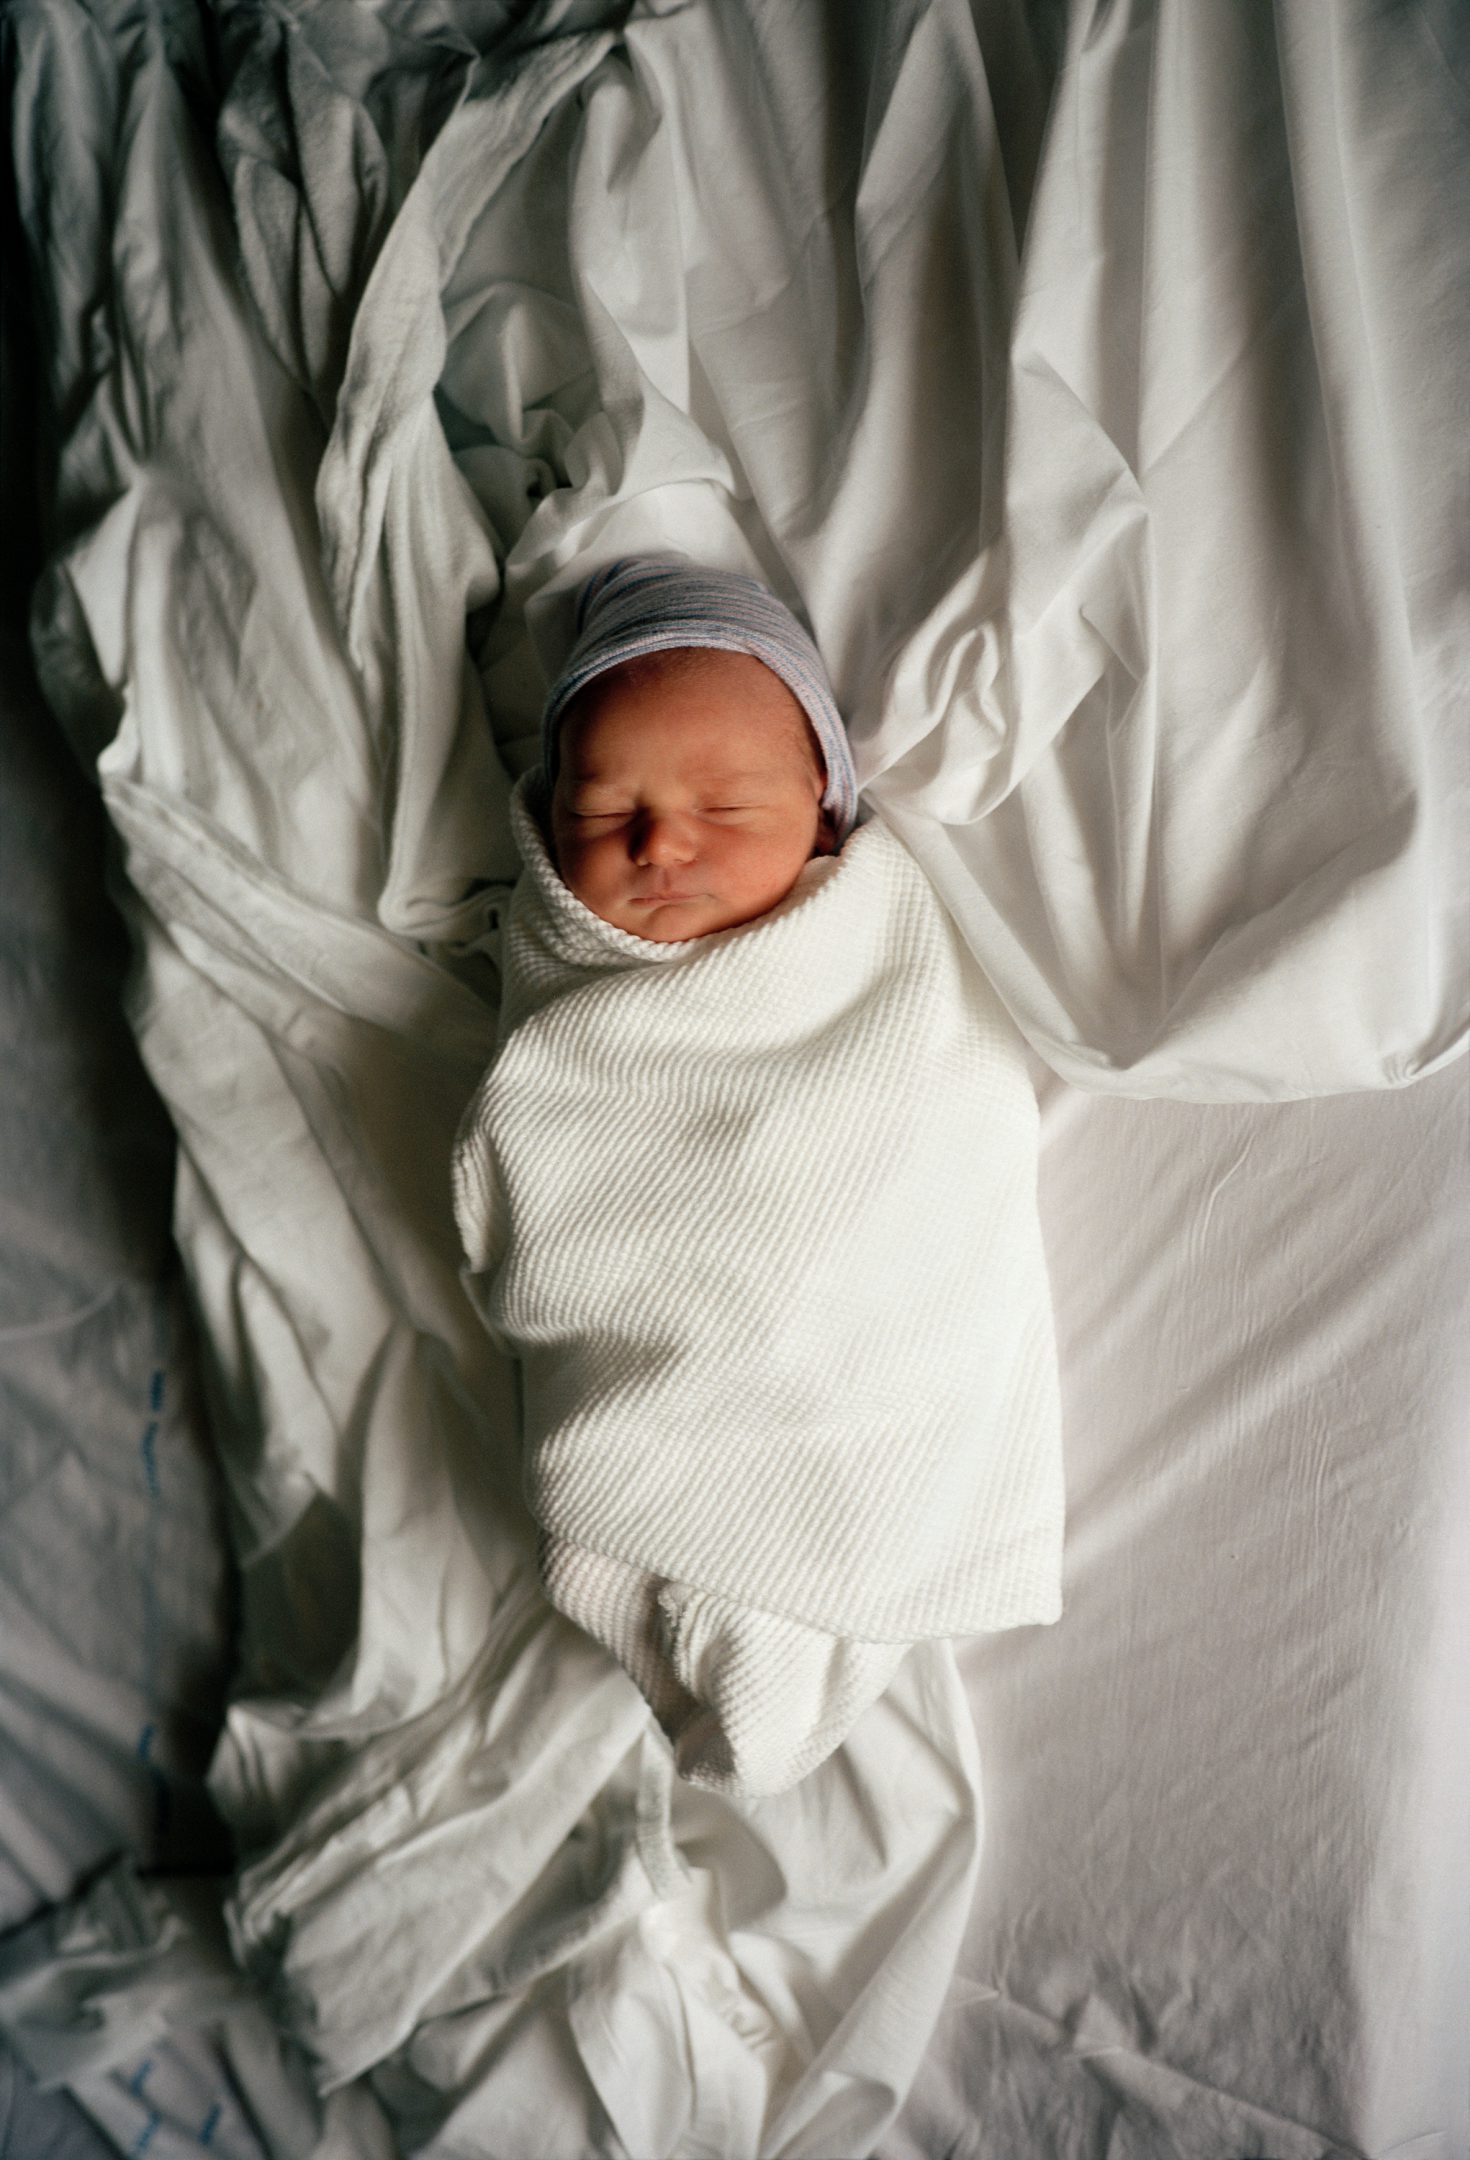 Paul D'Amato - Max, two days old, 1995